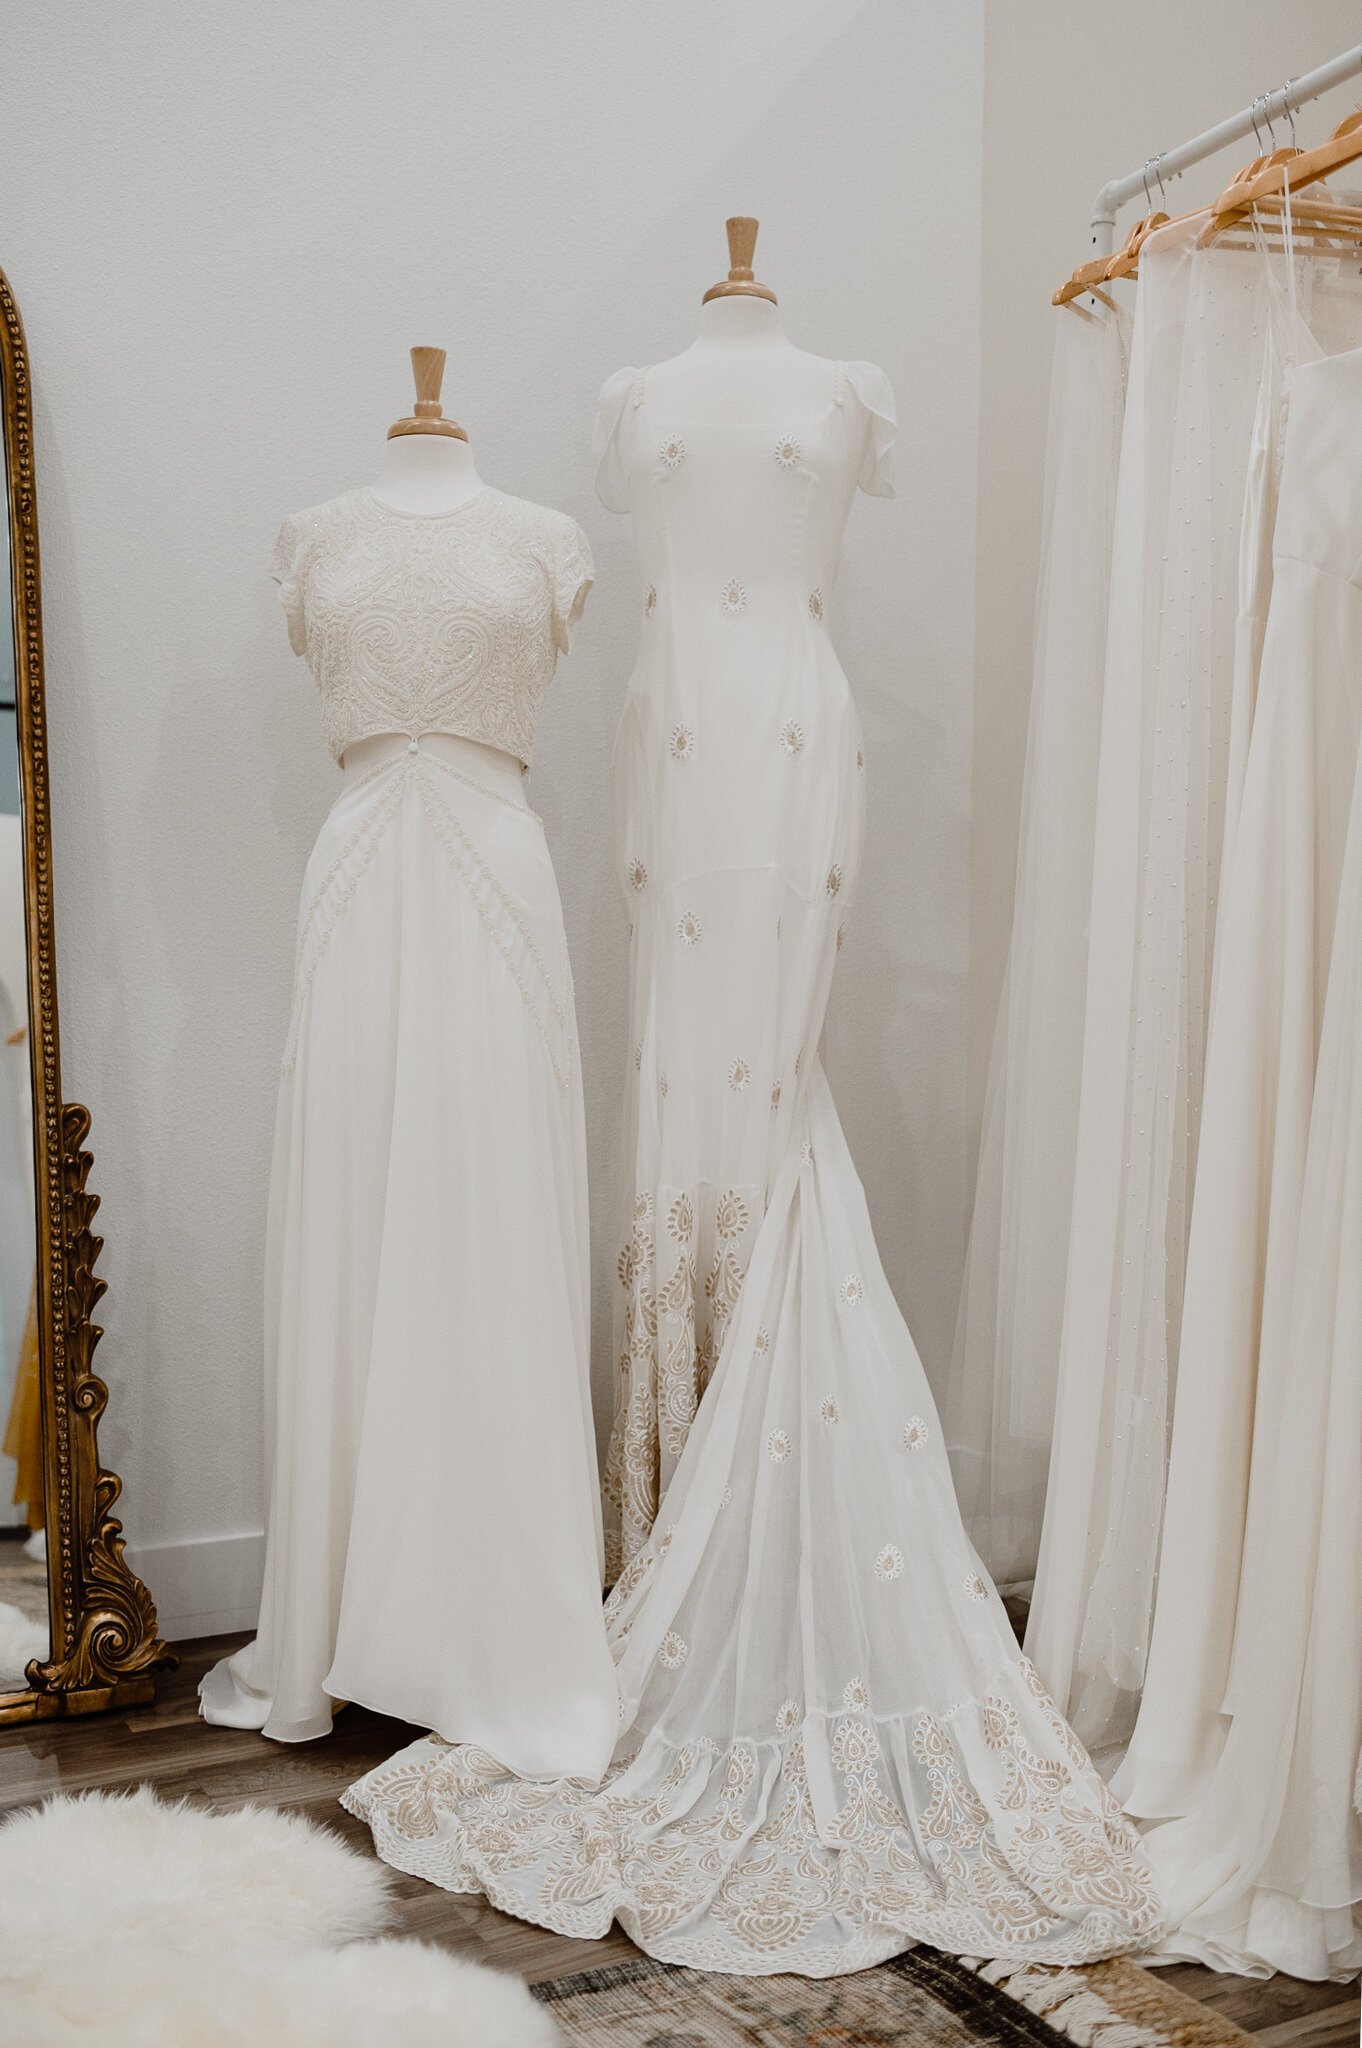 Lace Exchange | Shop & Consign | Wedding Dress Consignment in Reno, NV —  Moonlight Lace